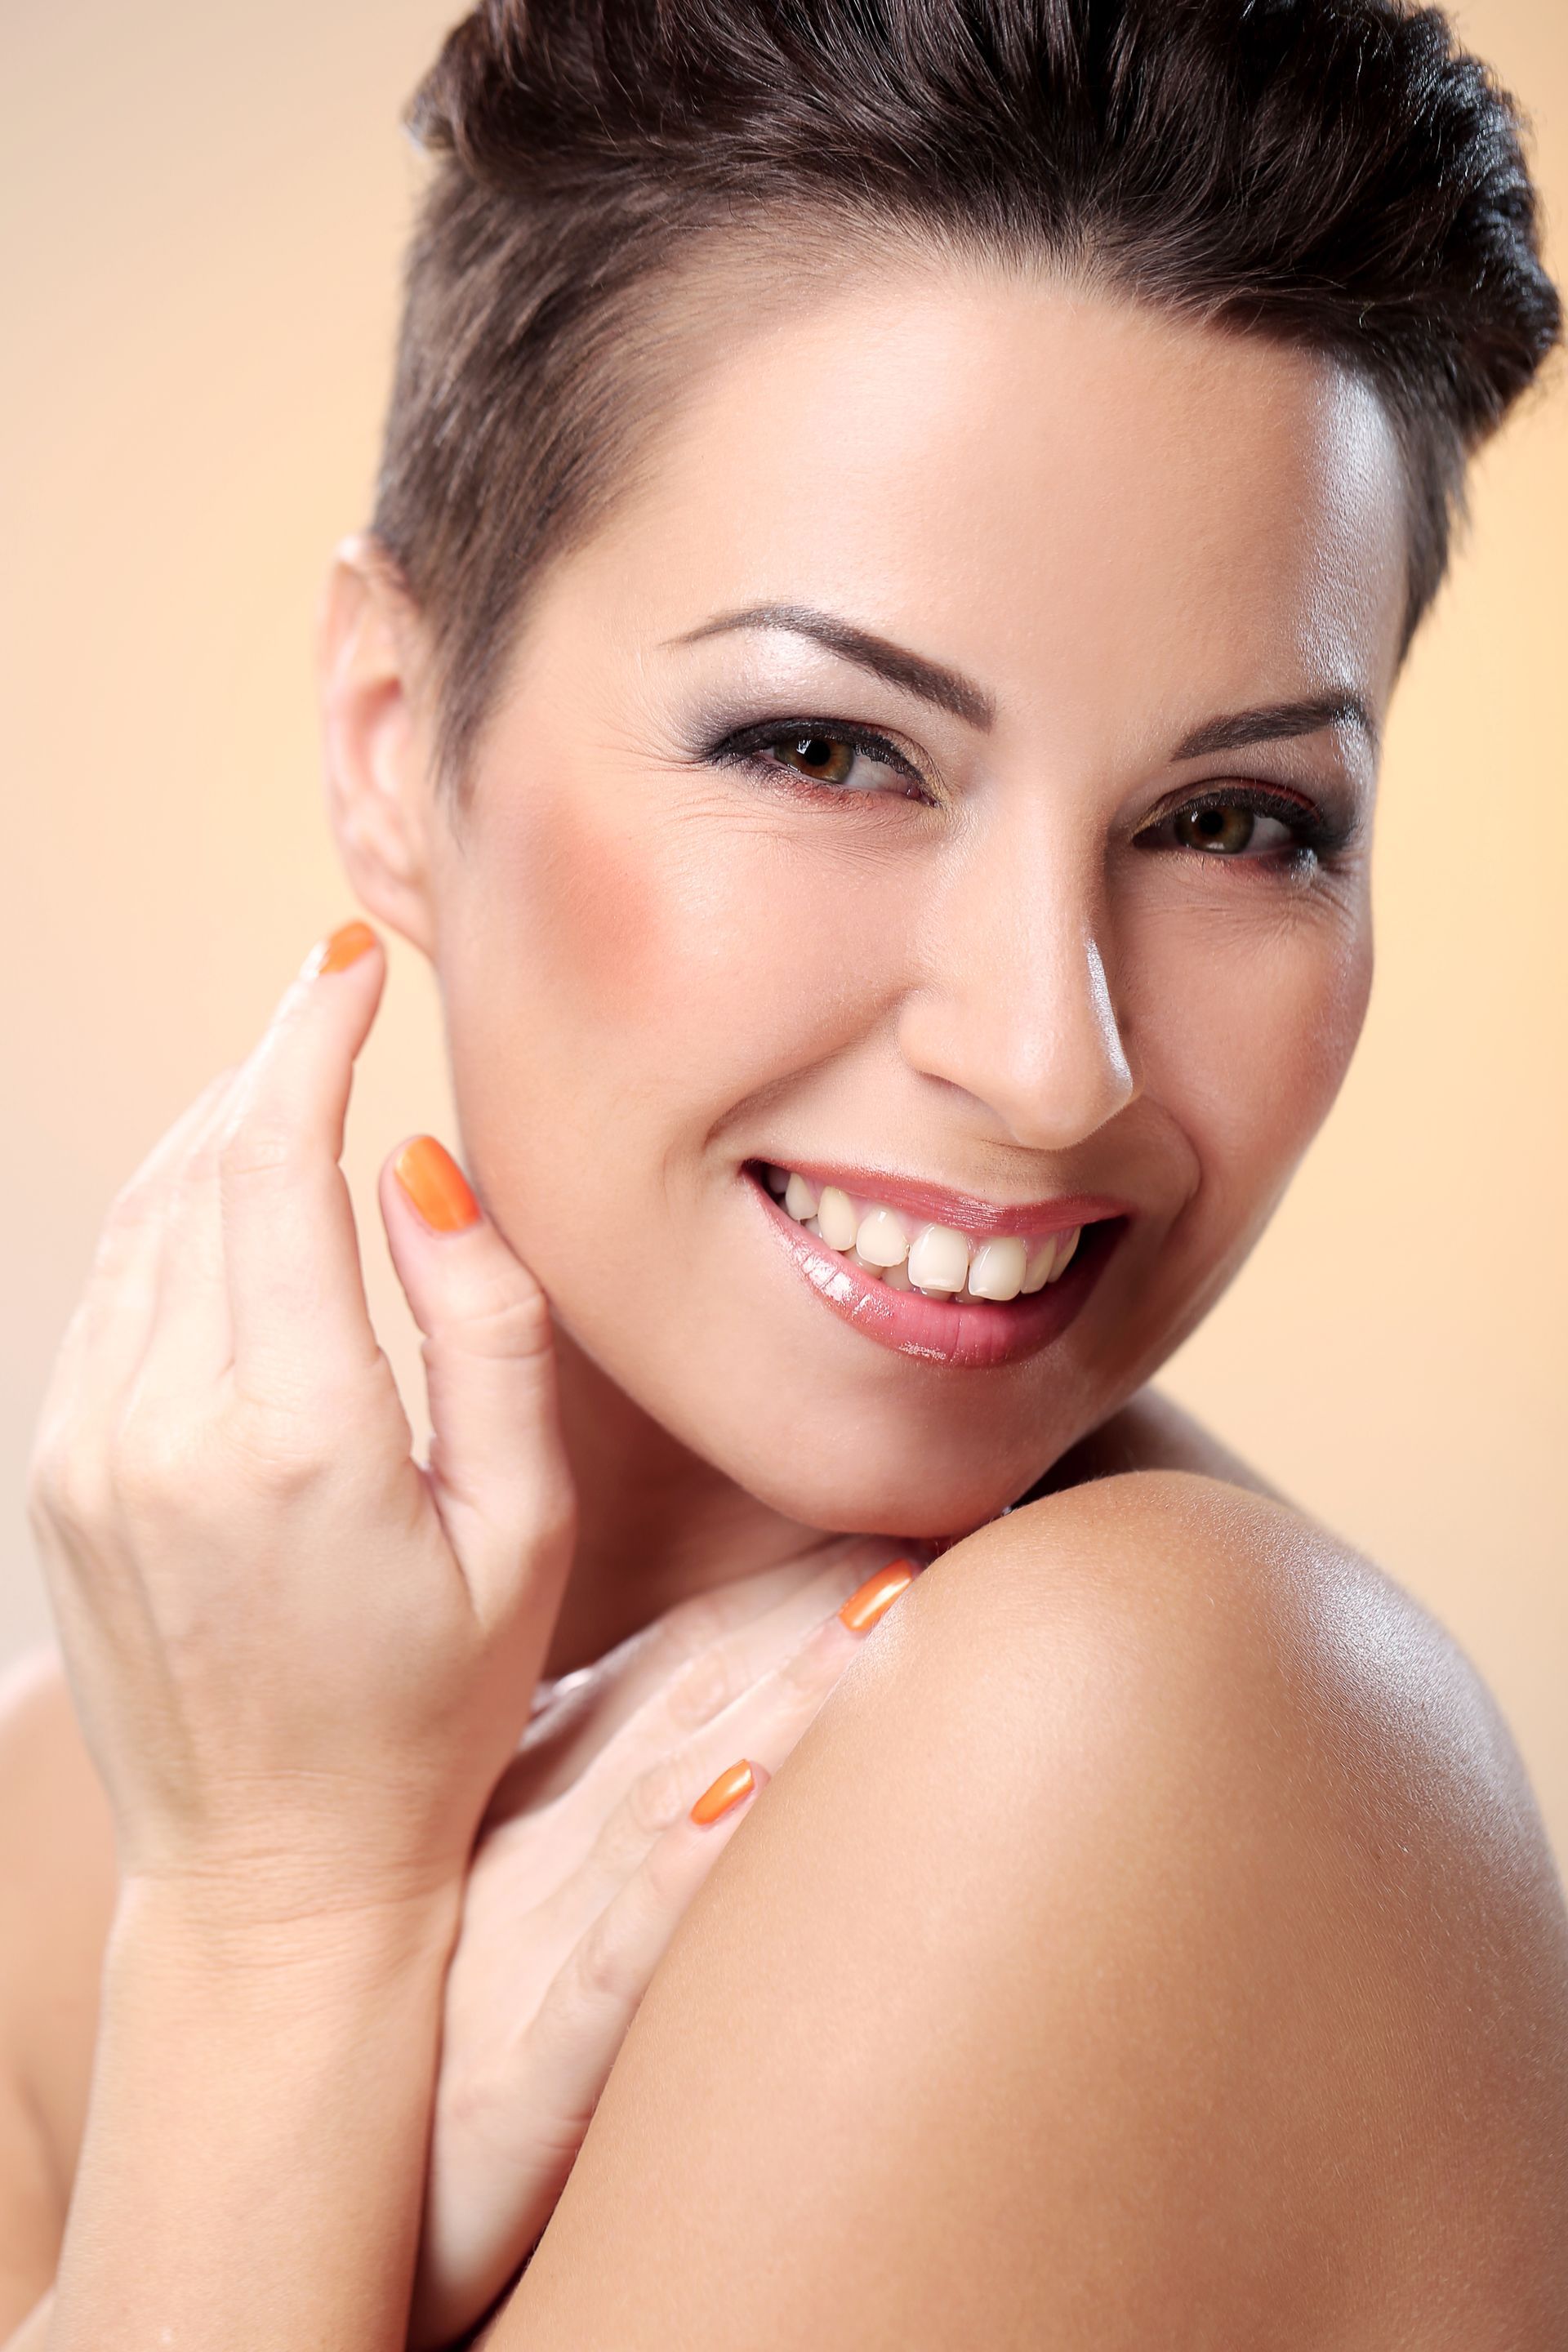 a woman with short hair is smiling and touching her face .